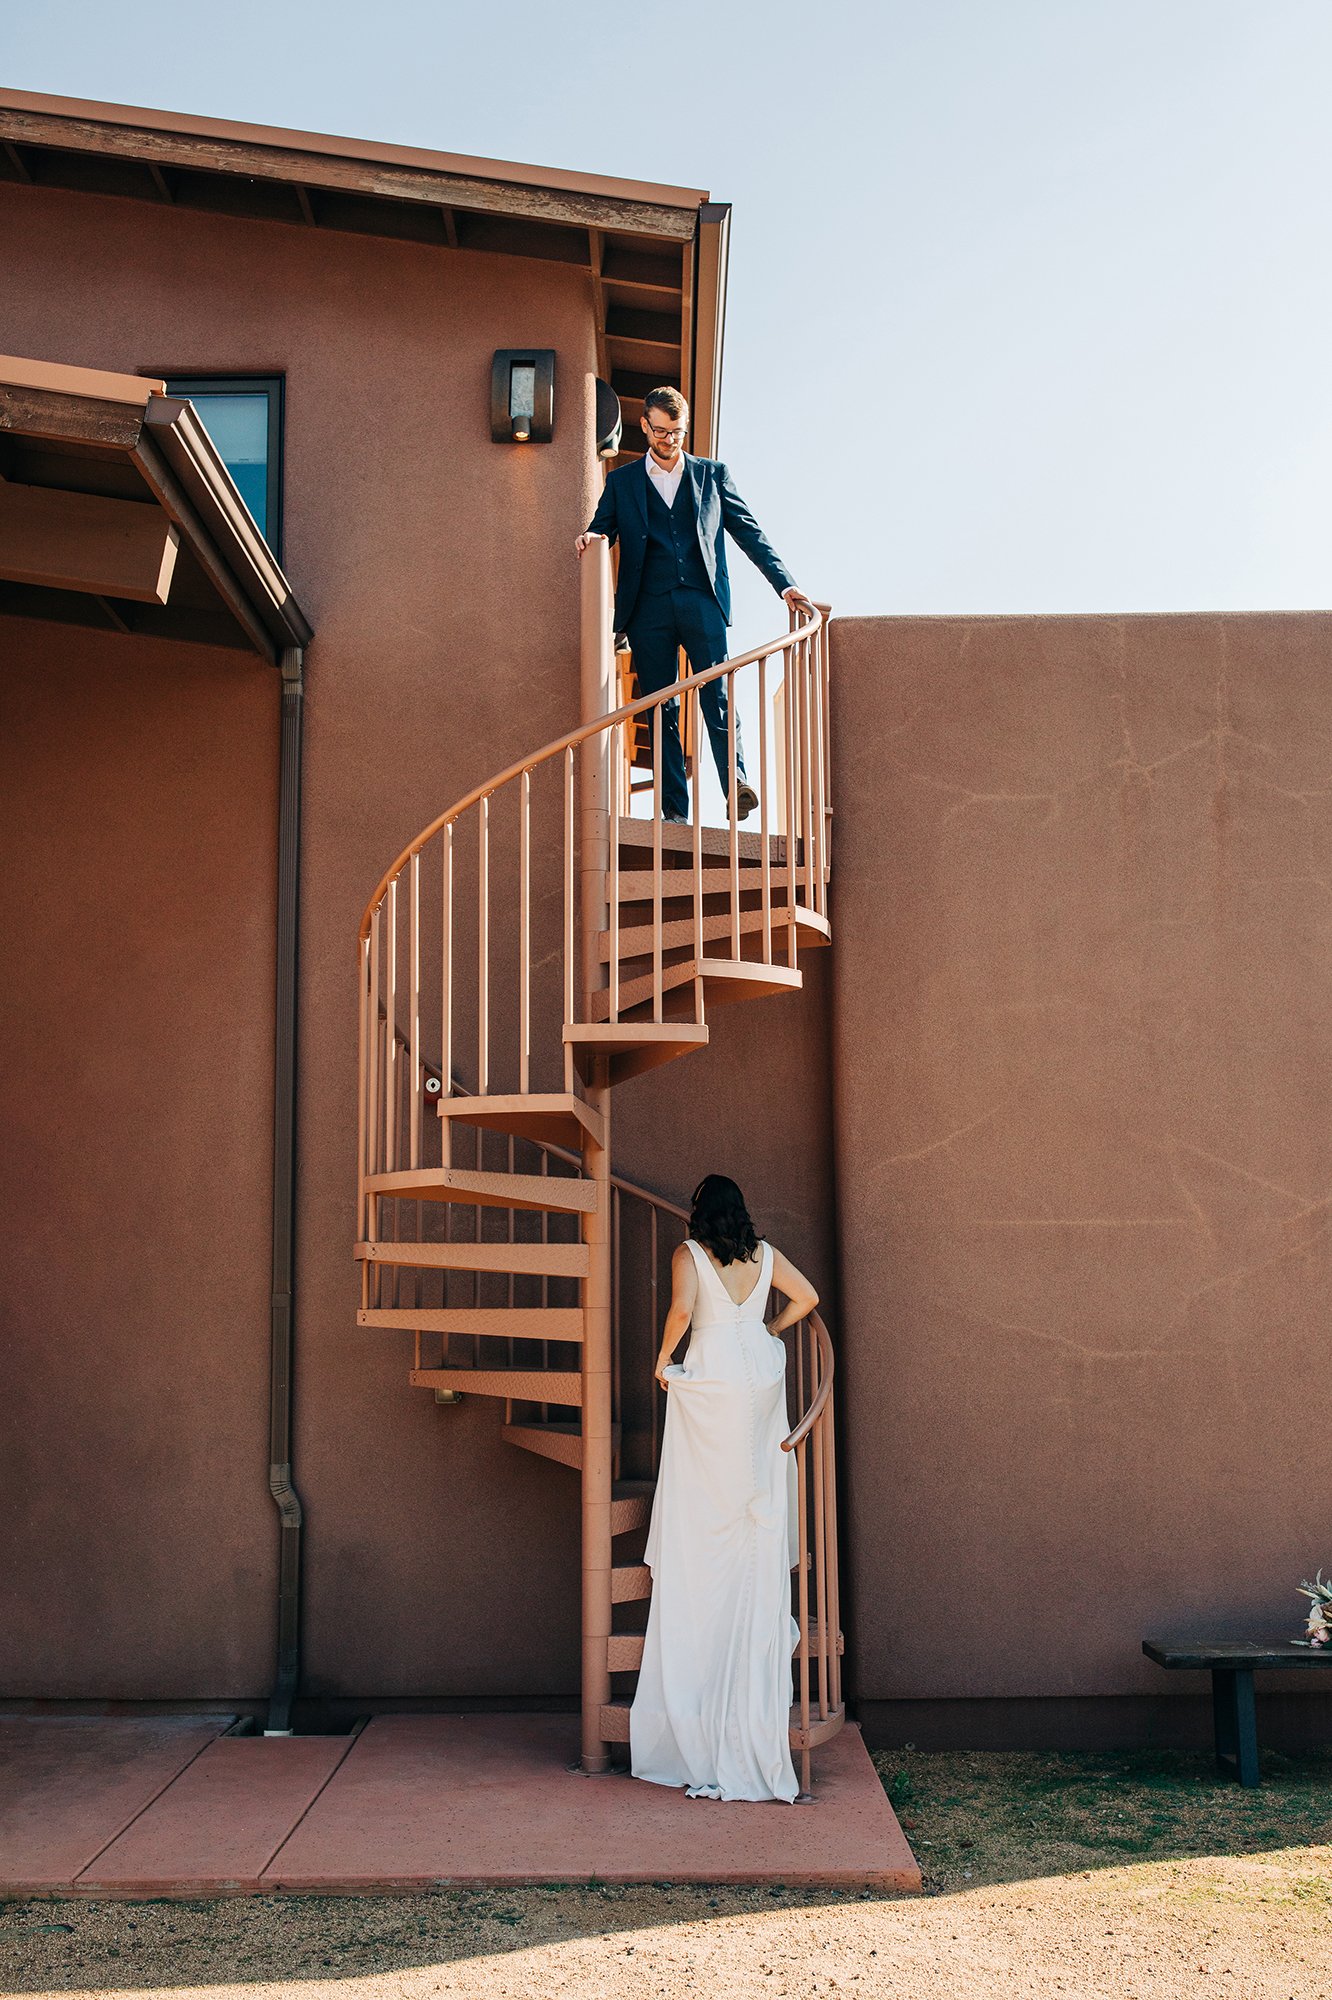 Matthew descends the stairs to meet his bride, Stephanie, wearing a lovely white dress during her Sedona wedding